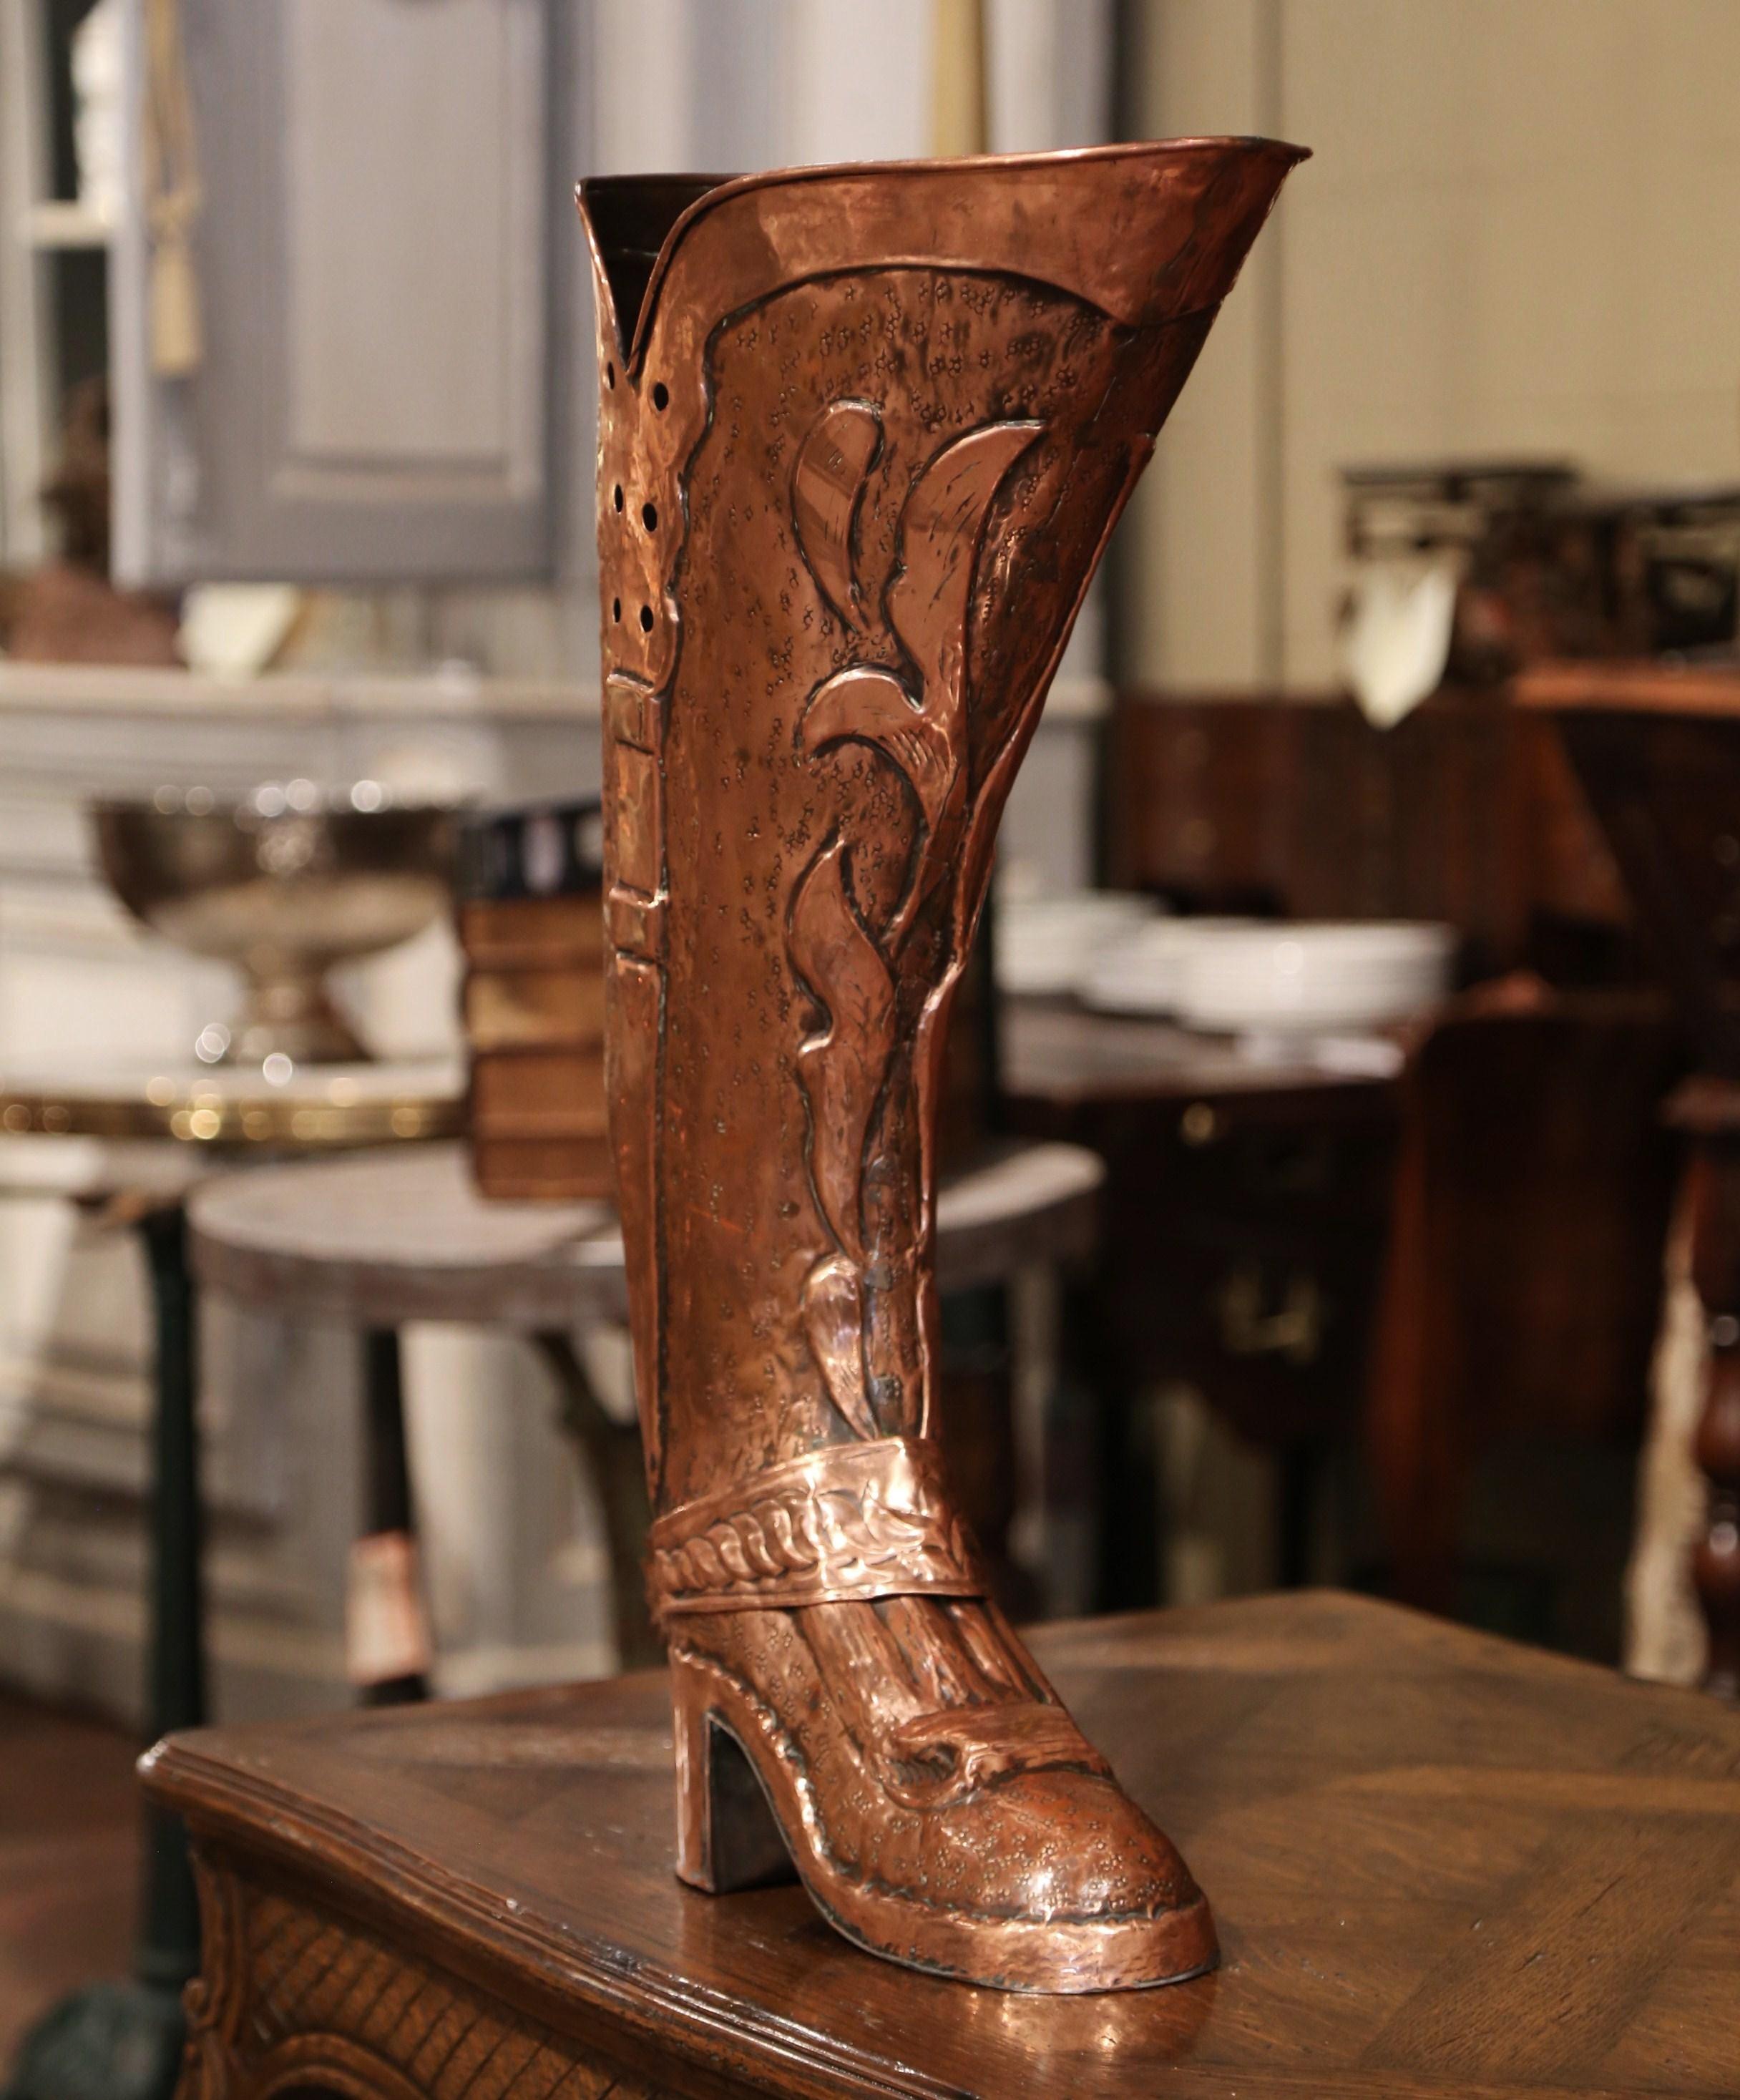 Place this tall, elegant copper boot stand at your front door or in your mudroom to catch loose canes and umbrellas. Crafted in Spain, circa 1920, the large shoe is in the shape of a musketeer boot decorated with a spur behind the heel. The